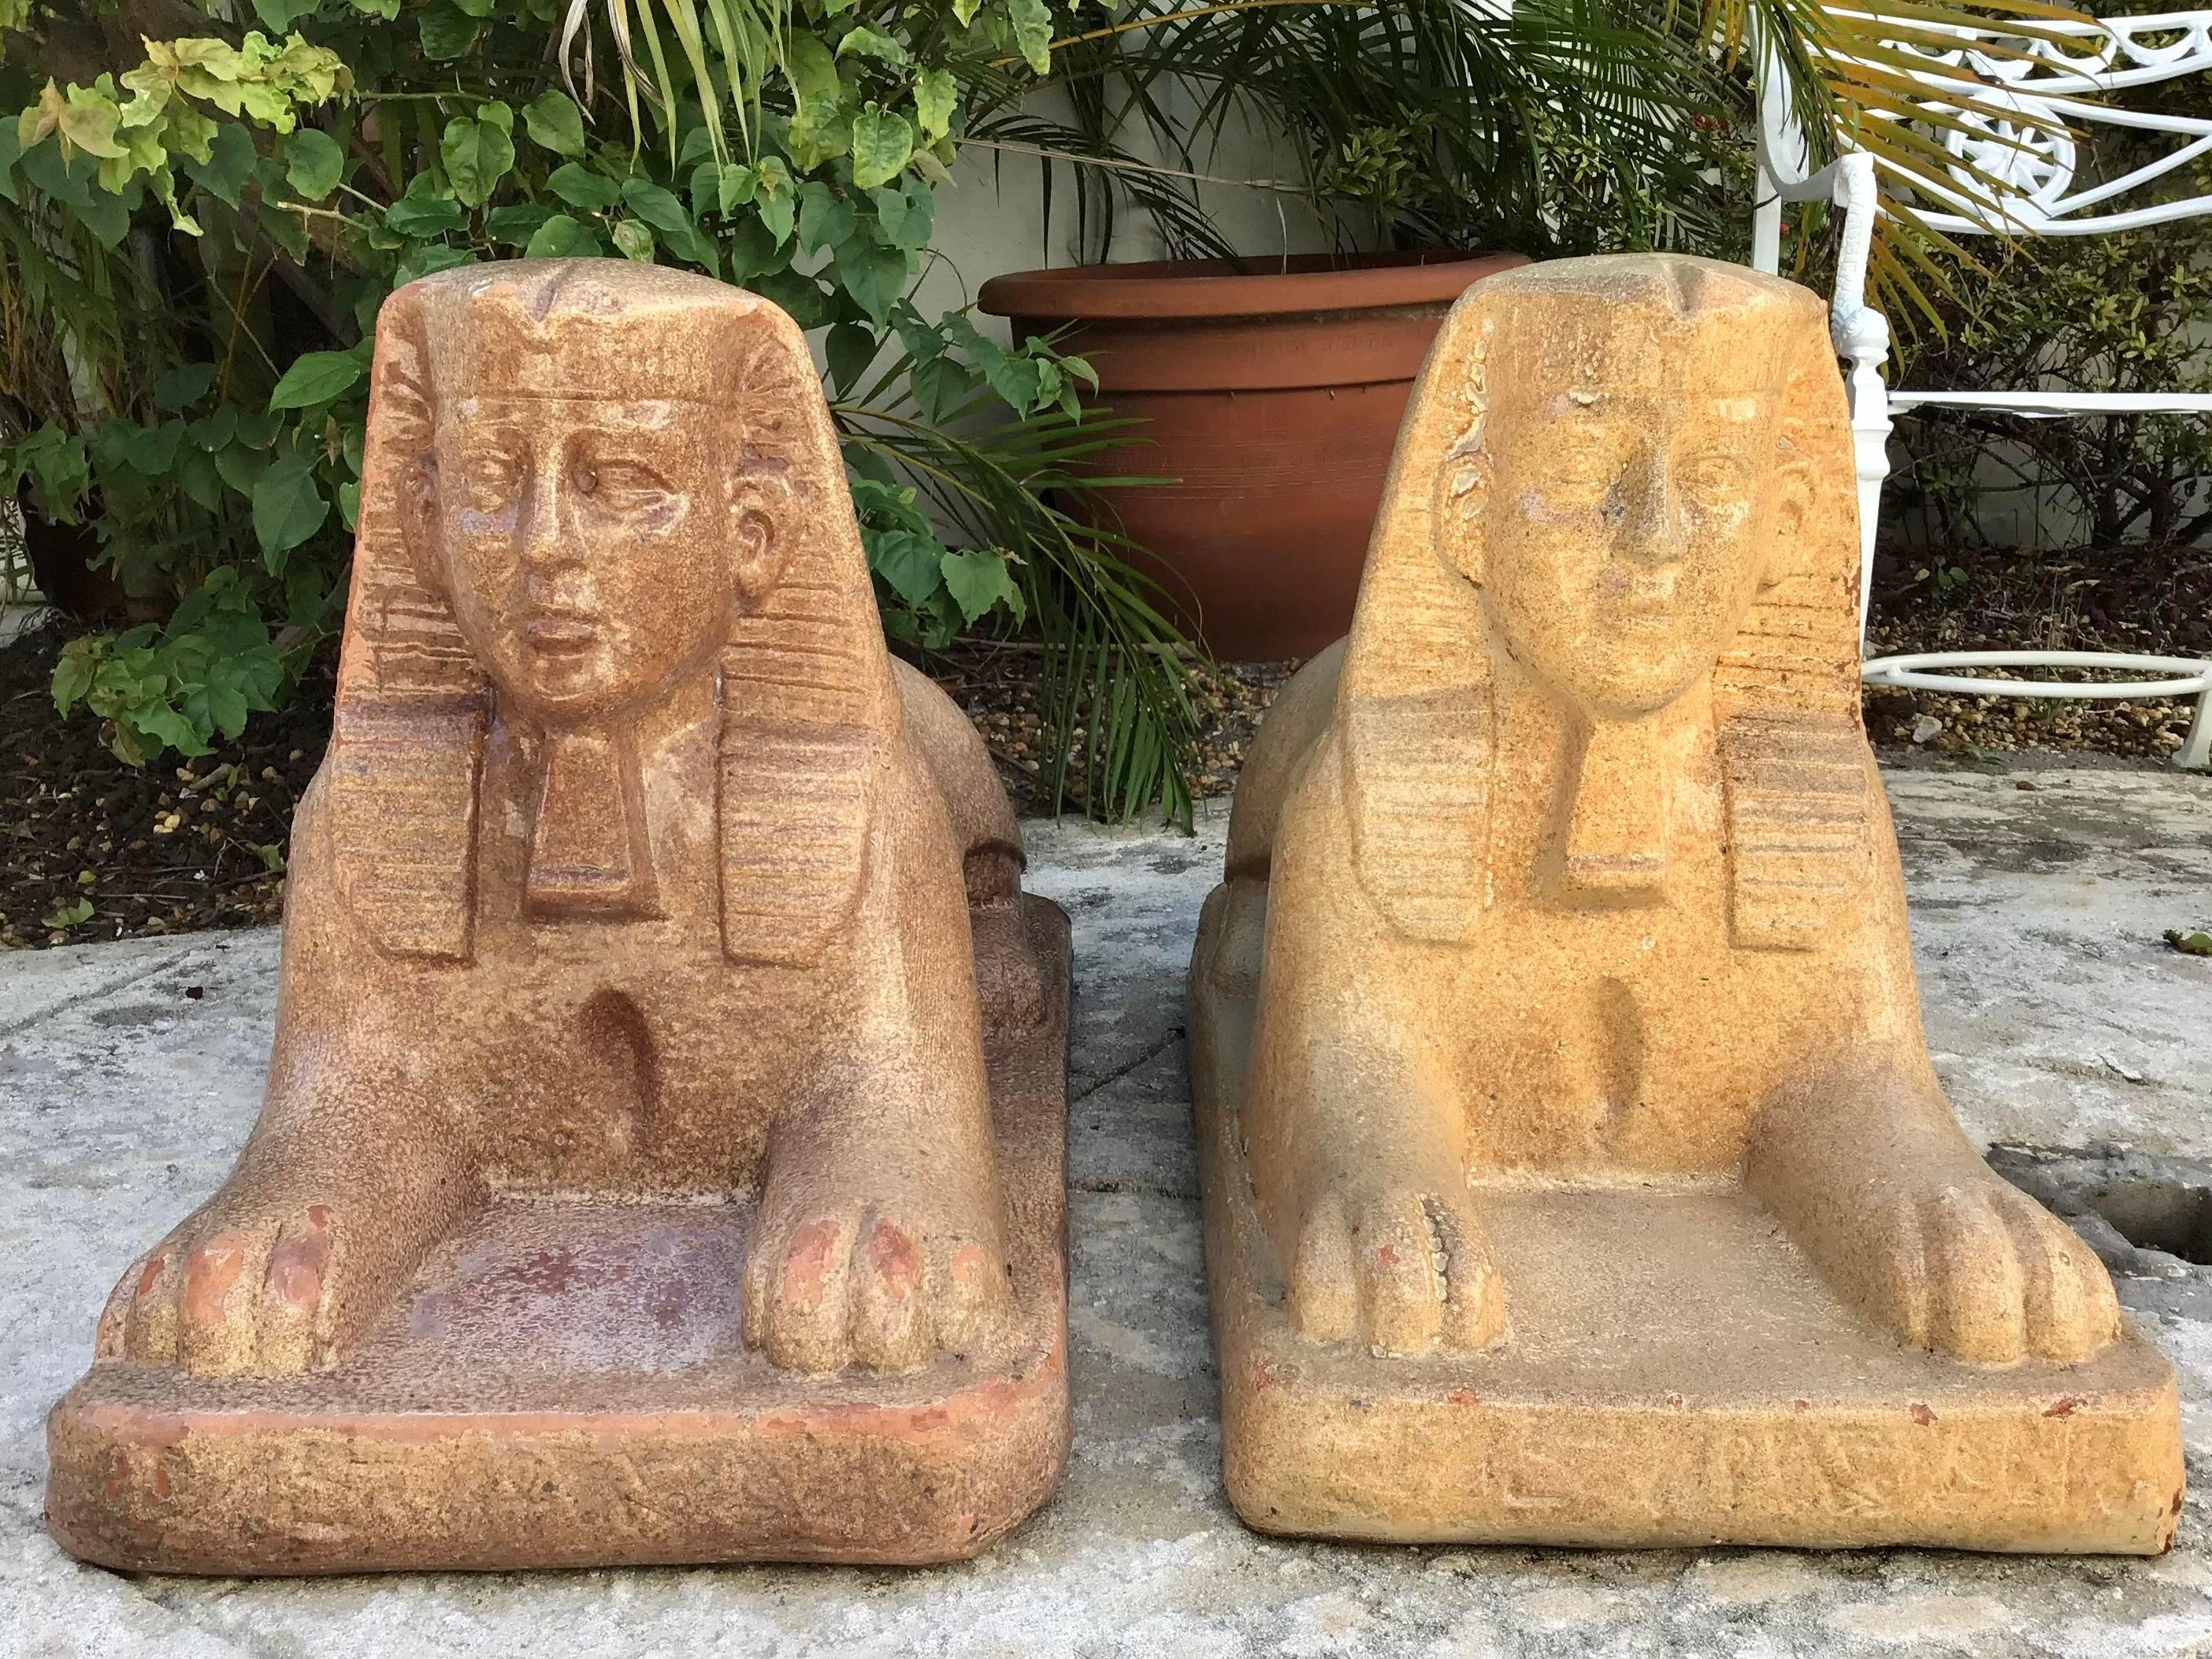 Fabulous pair of sphinx glazed terra cotta statues. Great addition to your entrance or garden.